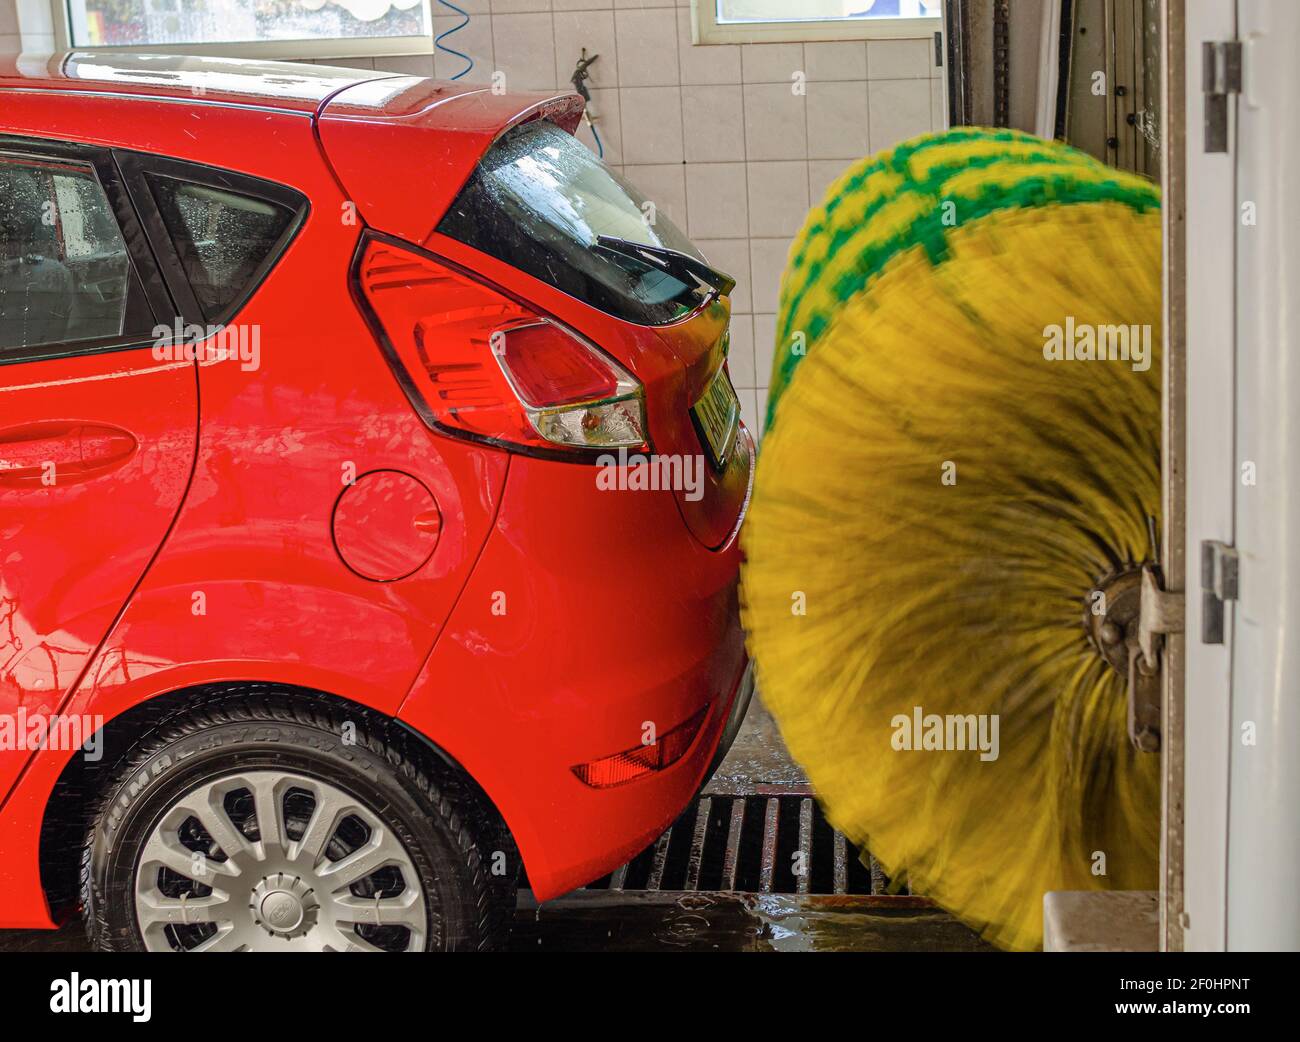 Red car at an automatic car wash. Stock Photo